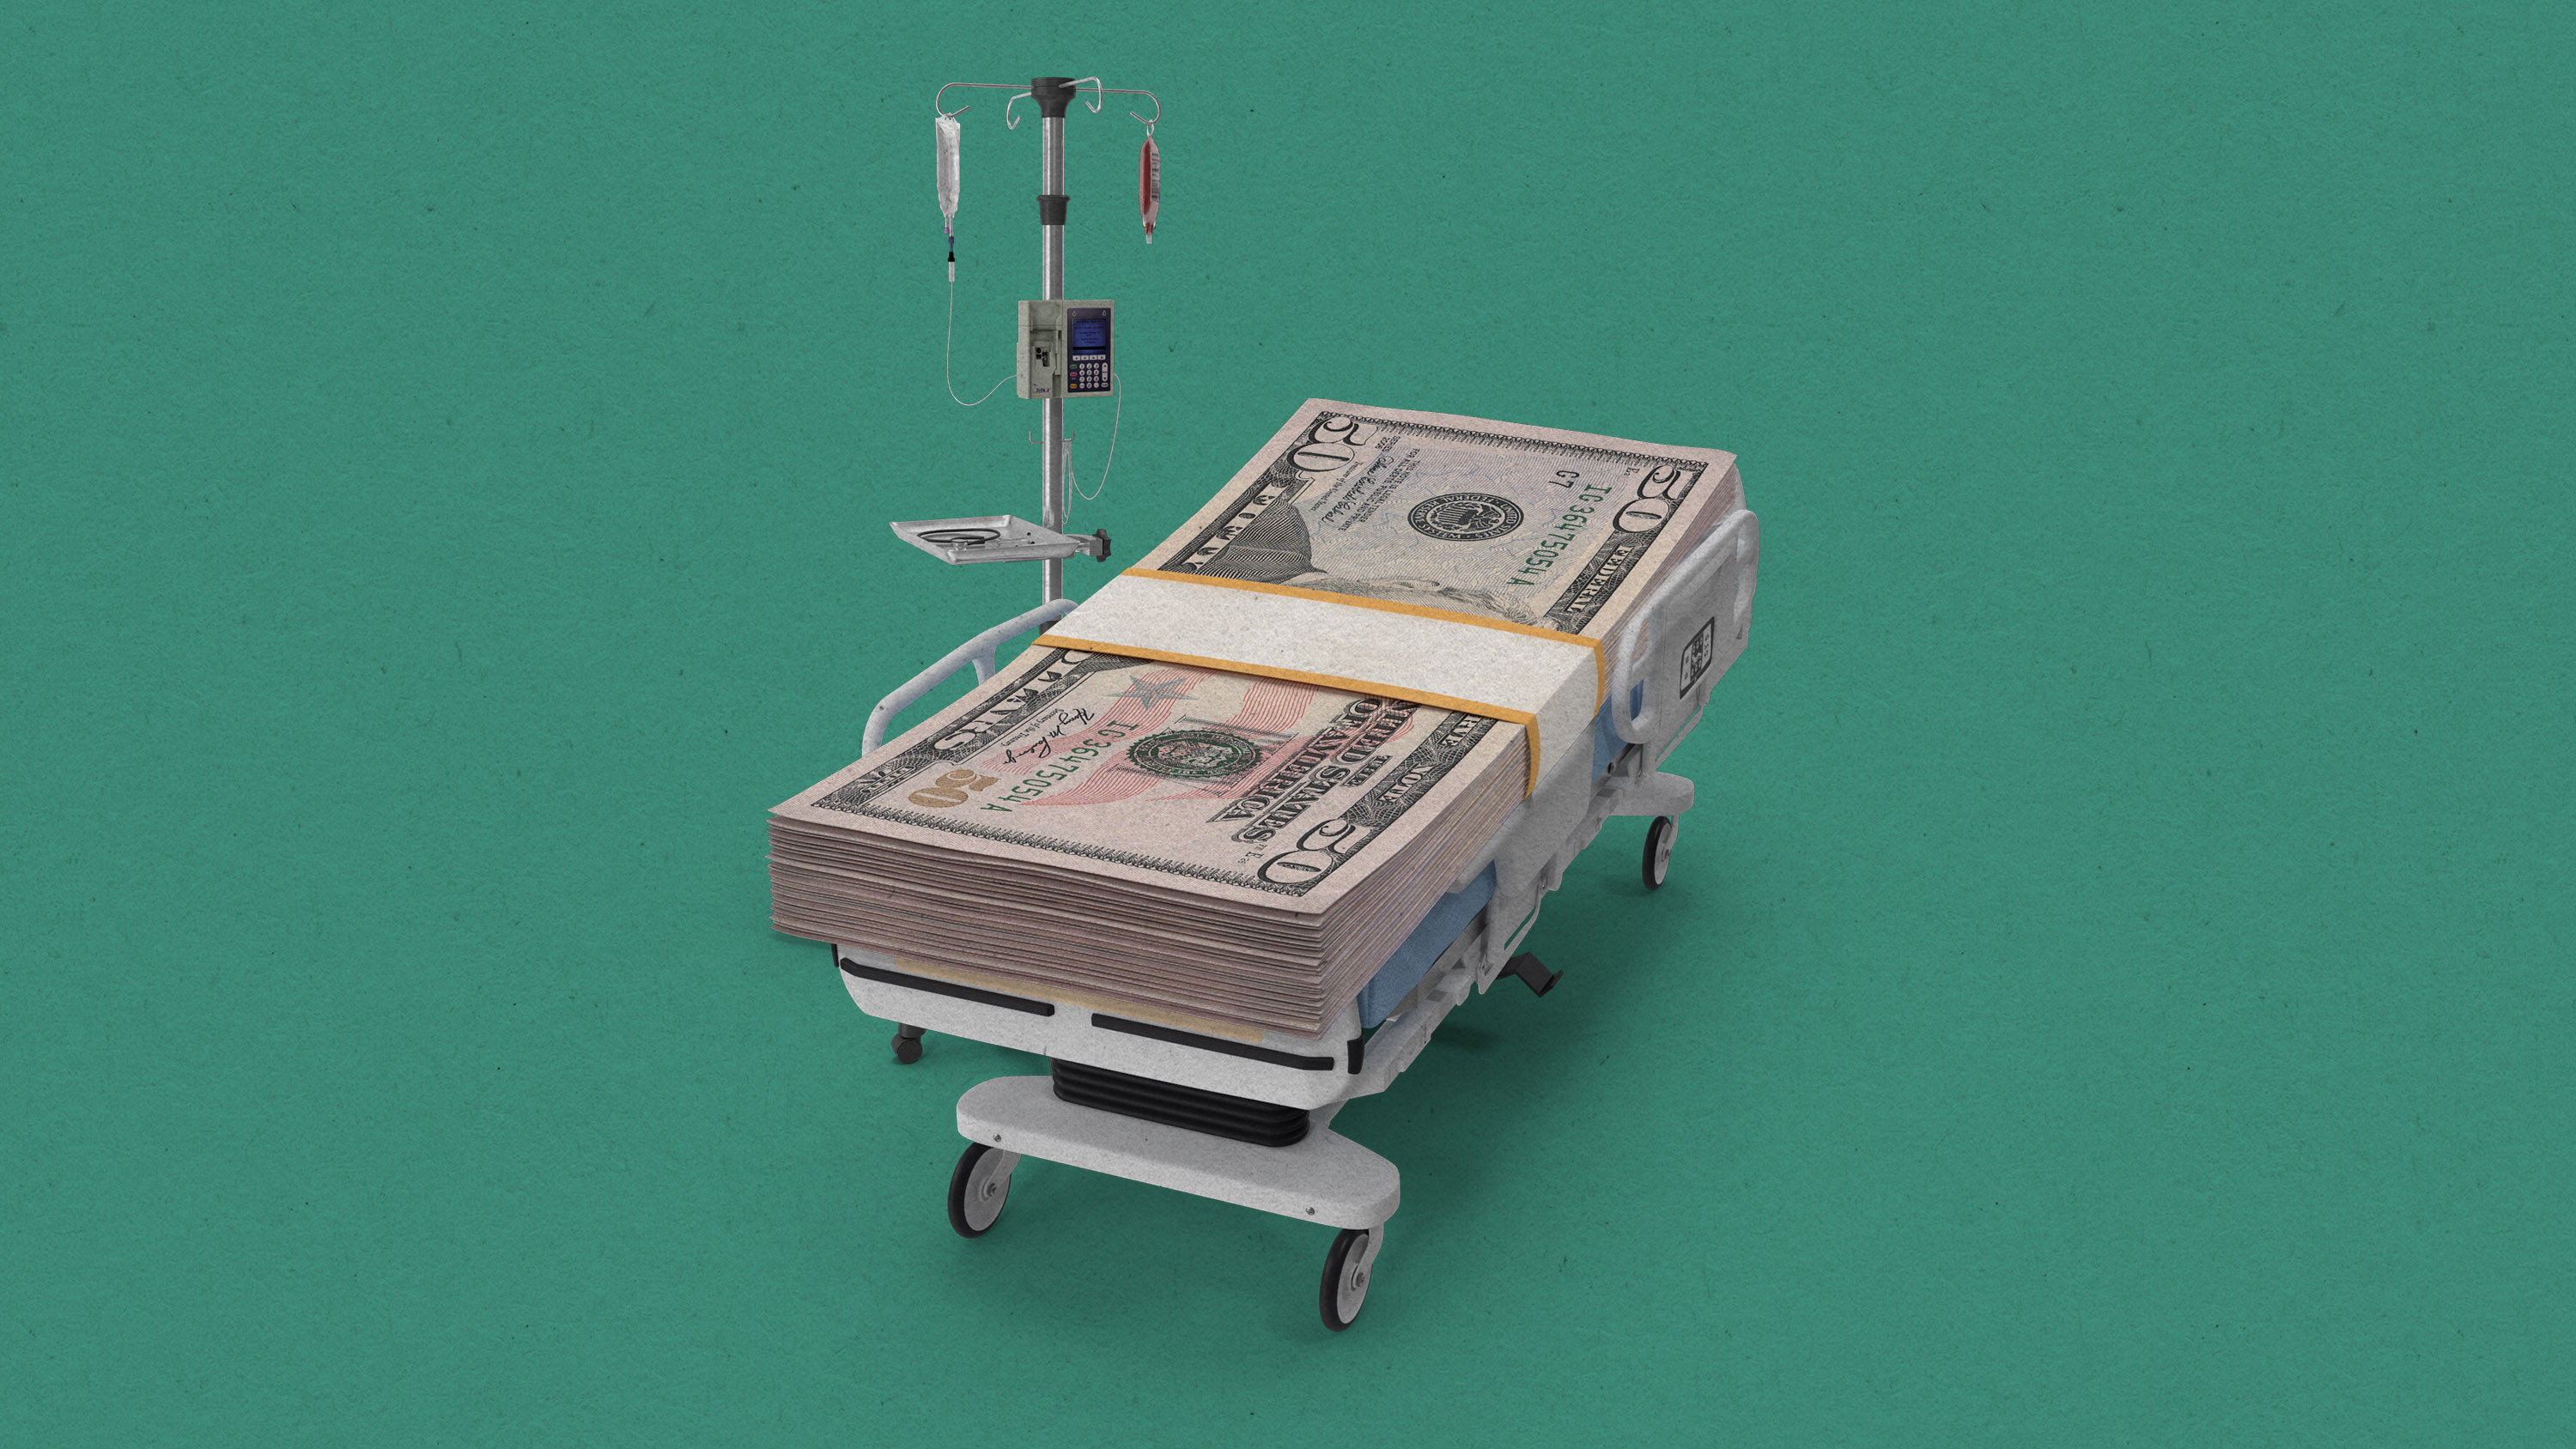 hospital bed made of a stack of money next to an IV treatment stand